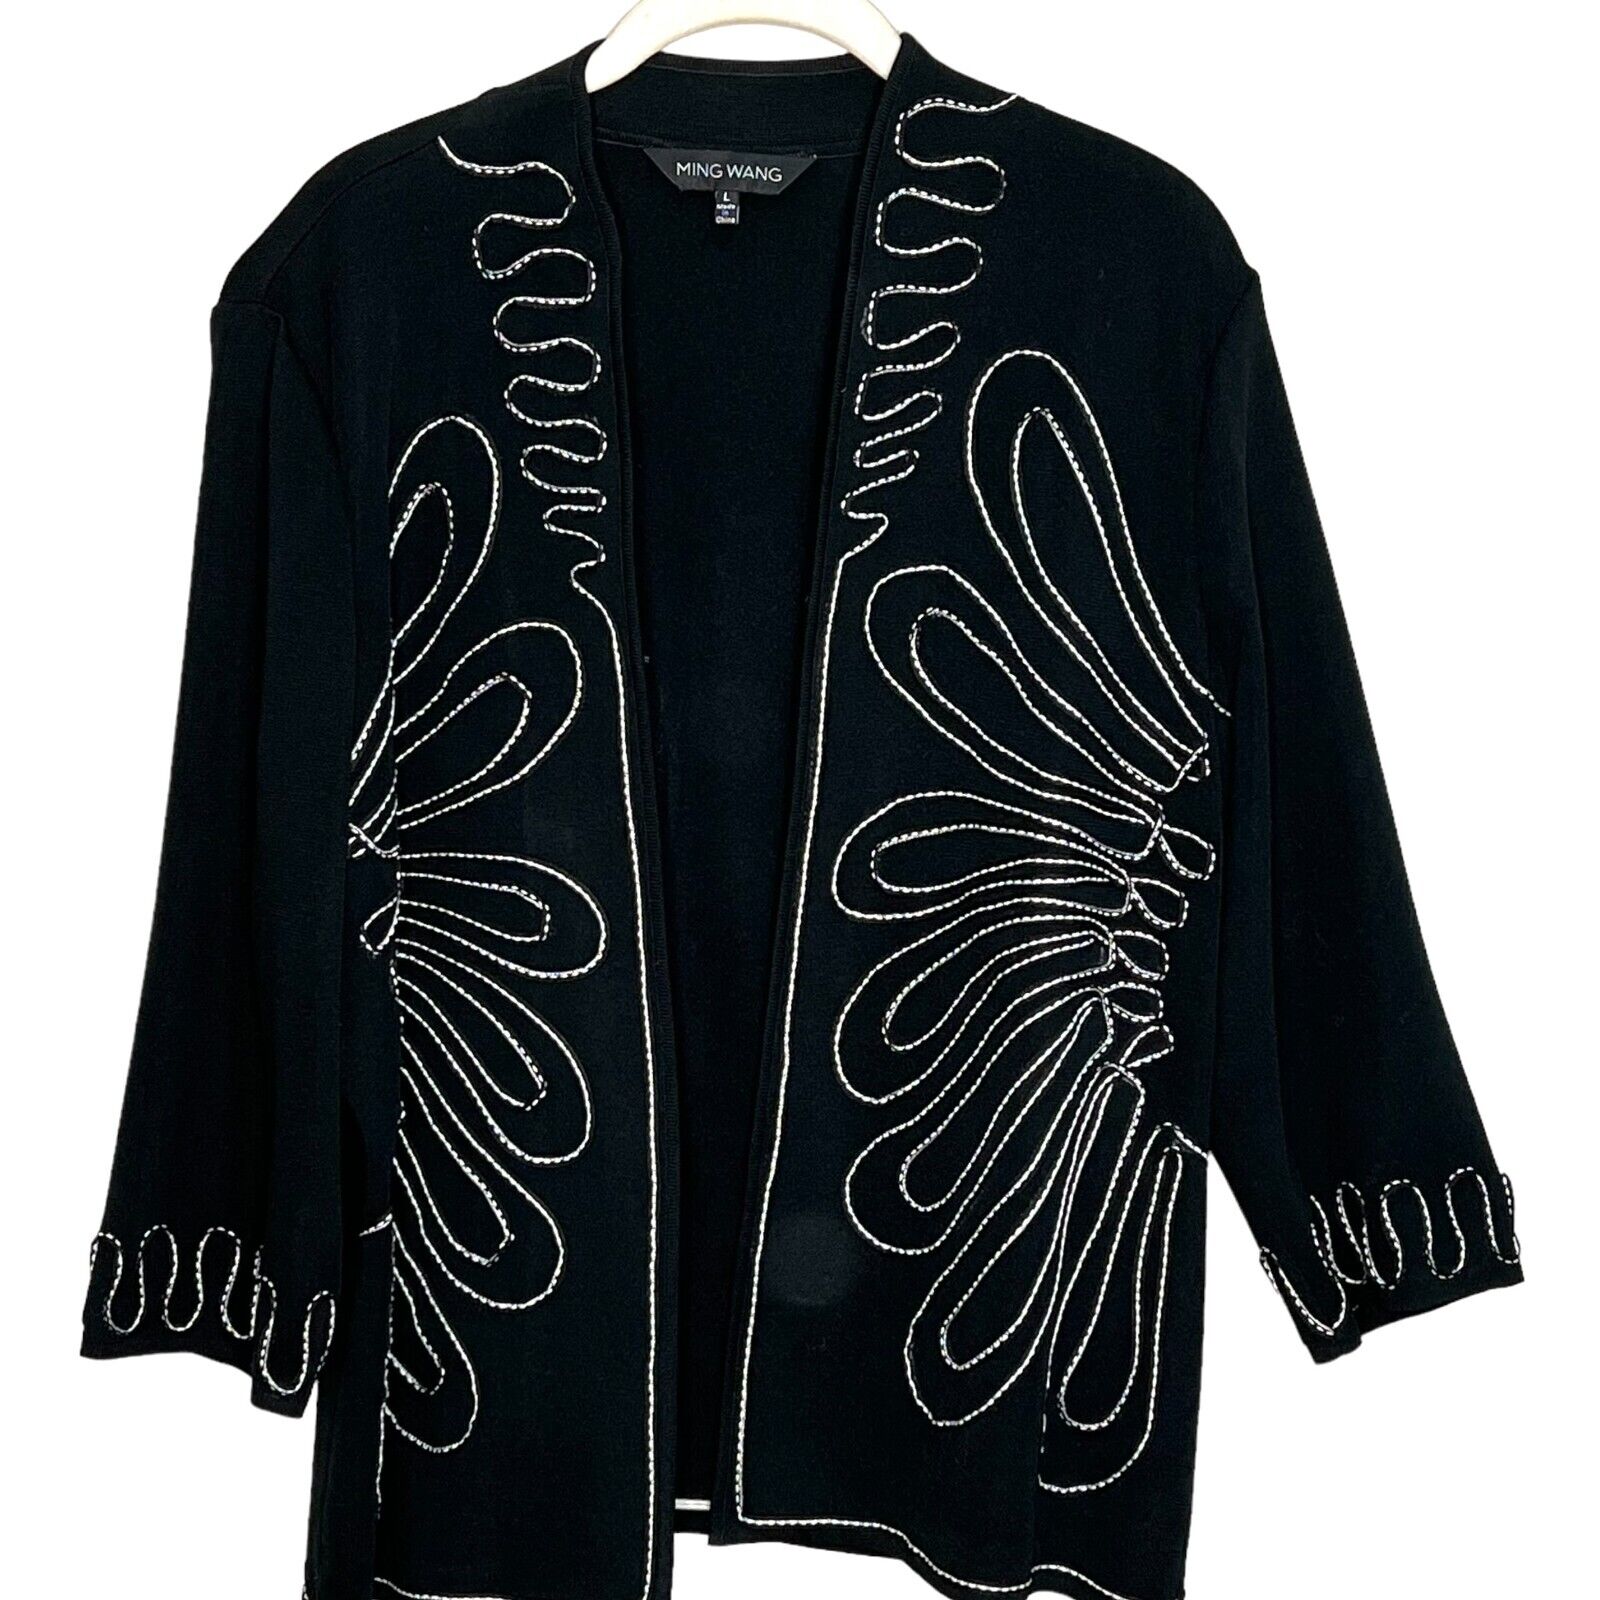 Ming Wang Black Embroidered Open Sweater Jacket Size Large